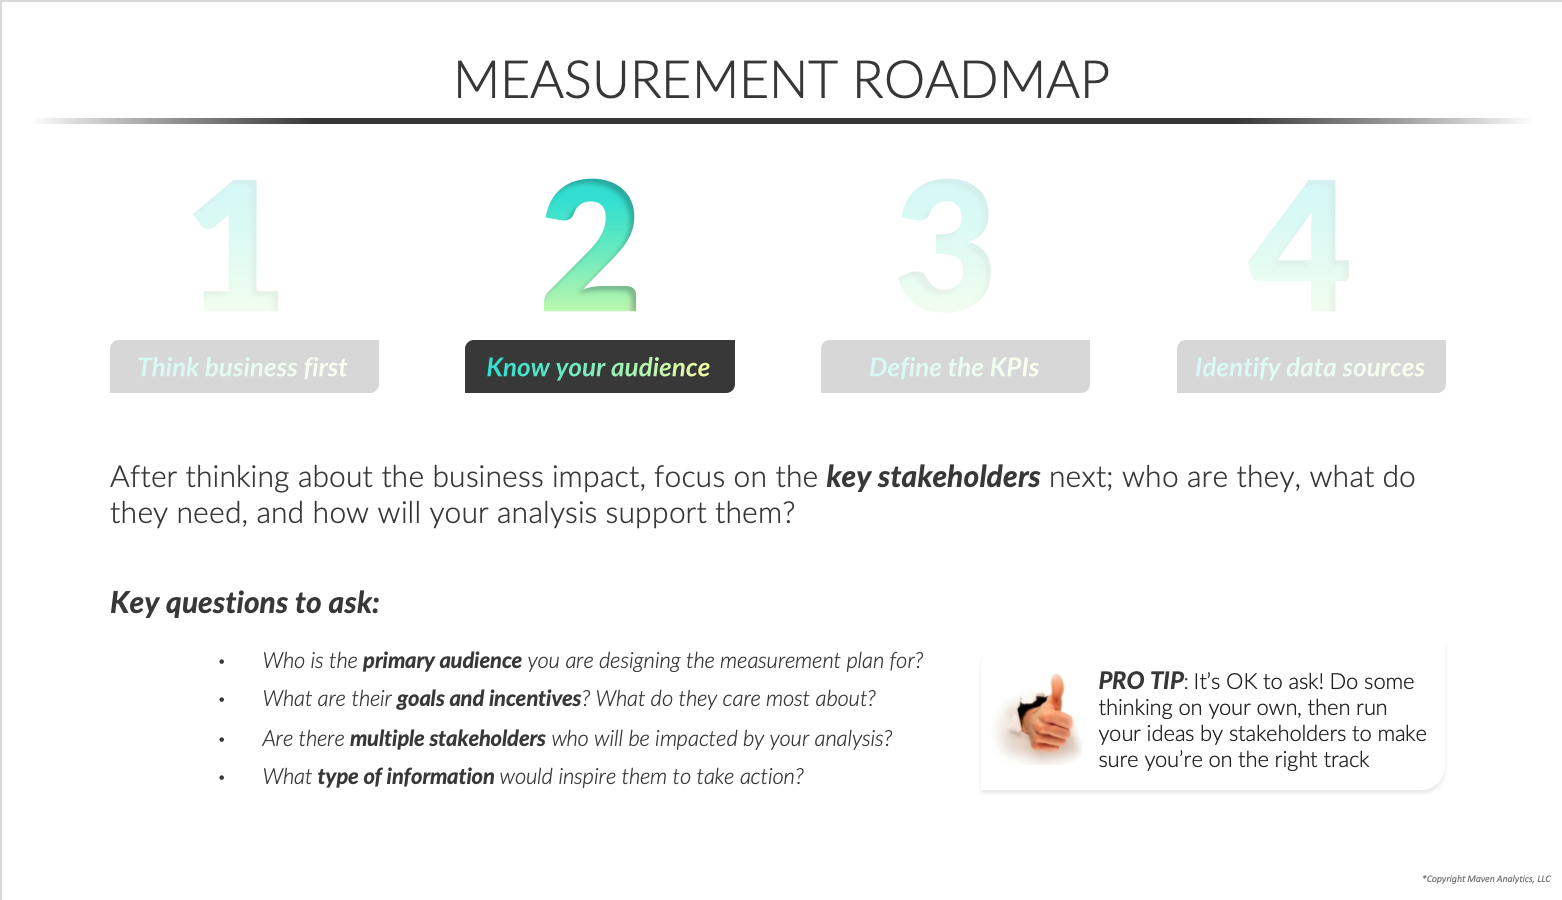 Measurement Planning Step 2 - Know Your Audience